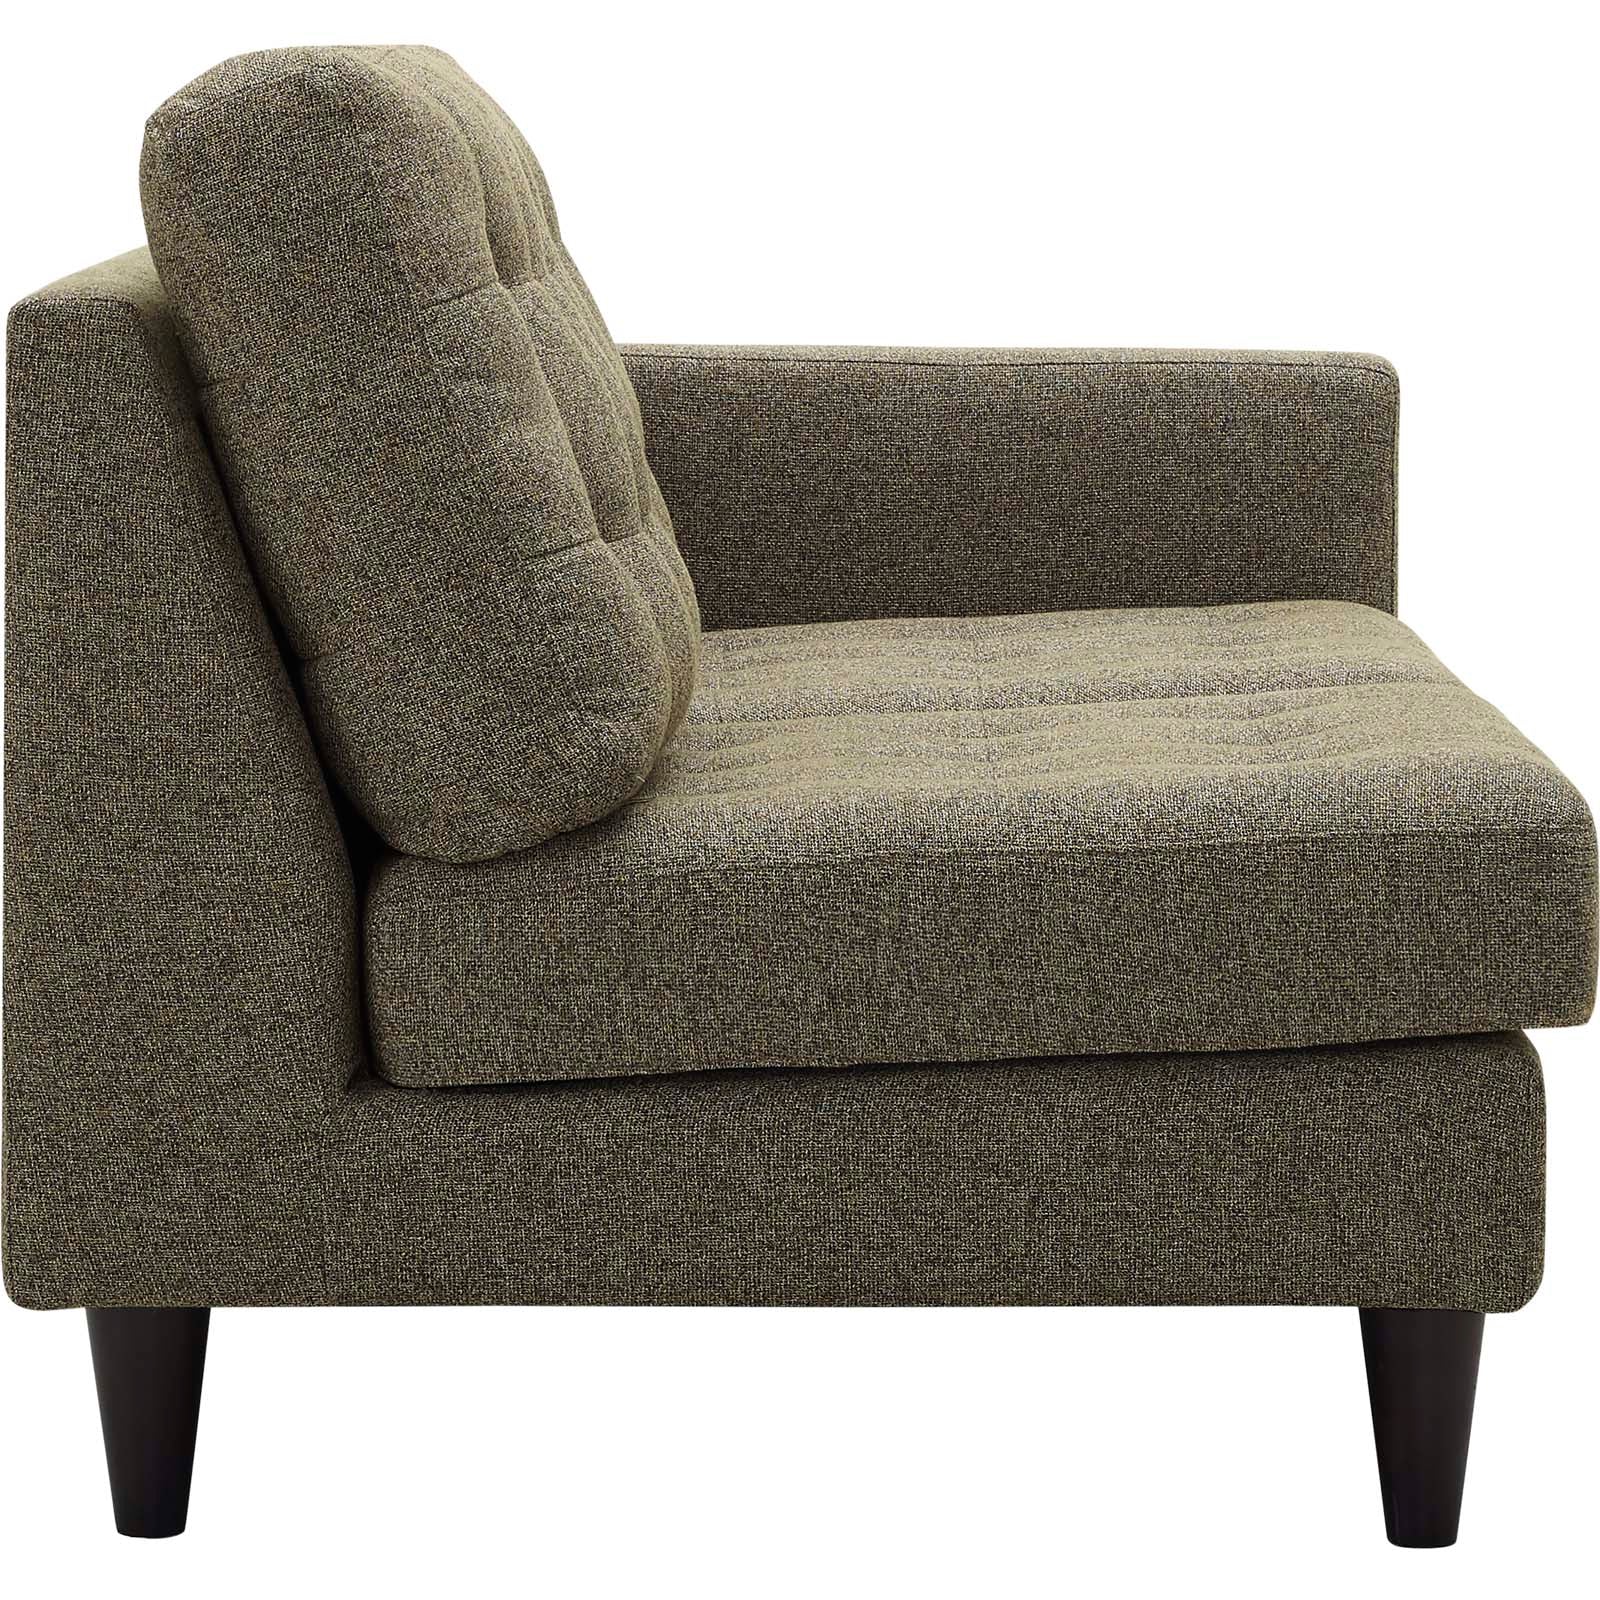 Modway Loveseats - Empress Right-Facing Upholstered Fabric Loveseat Oatmeal